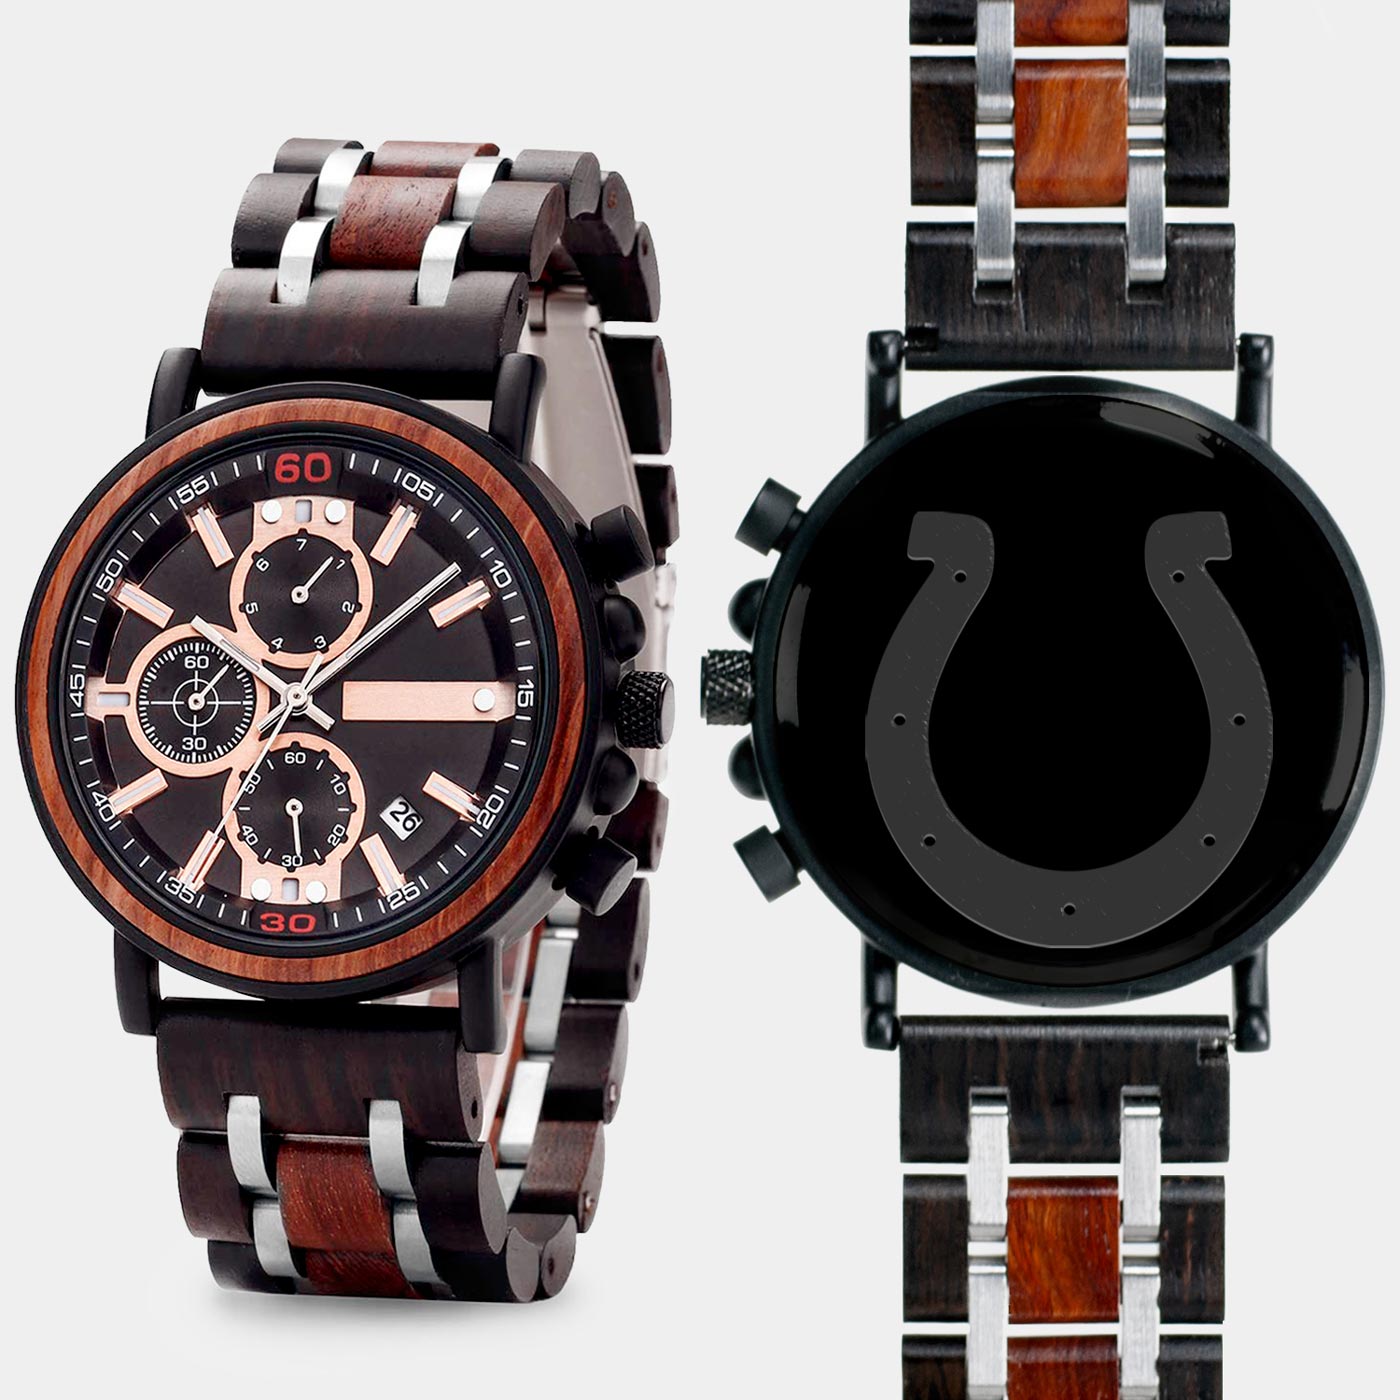 Indianapolis Colts Mens Wrist Watch  - Personalized Indianapolis Colts Mens Watches - Custom Gifts For Him, Birthday Gifts, Gift For Dad - Best 2022 Indianapolis Colts Christmas Gifts - Black 45mm NFL Wood Watch